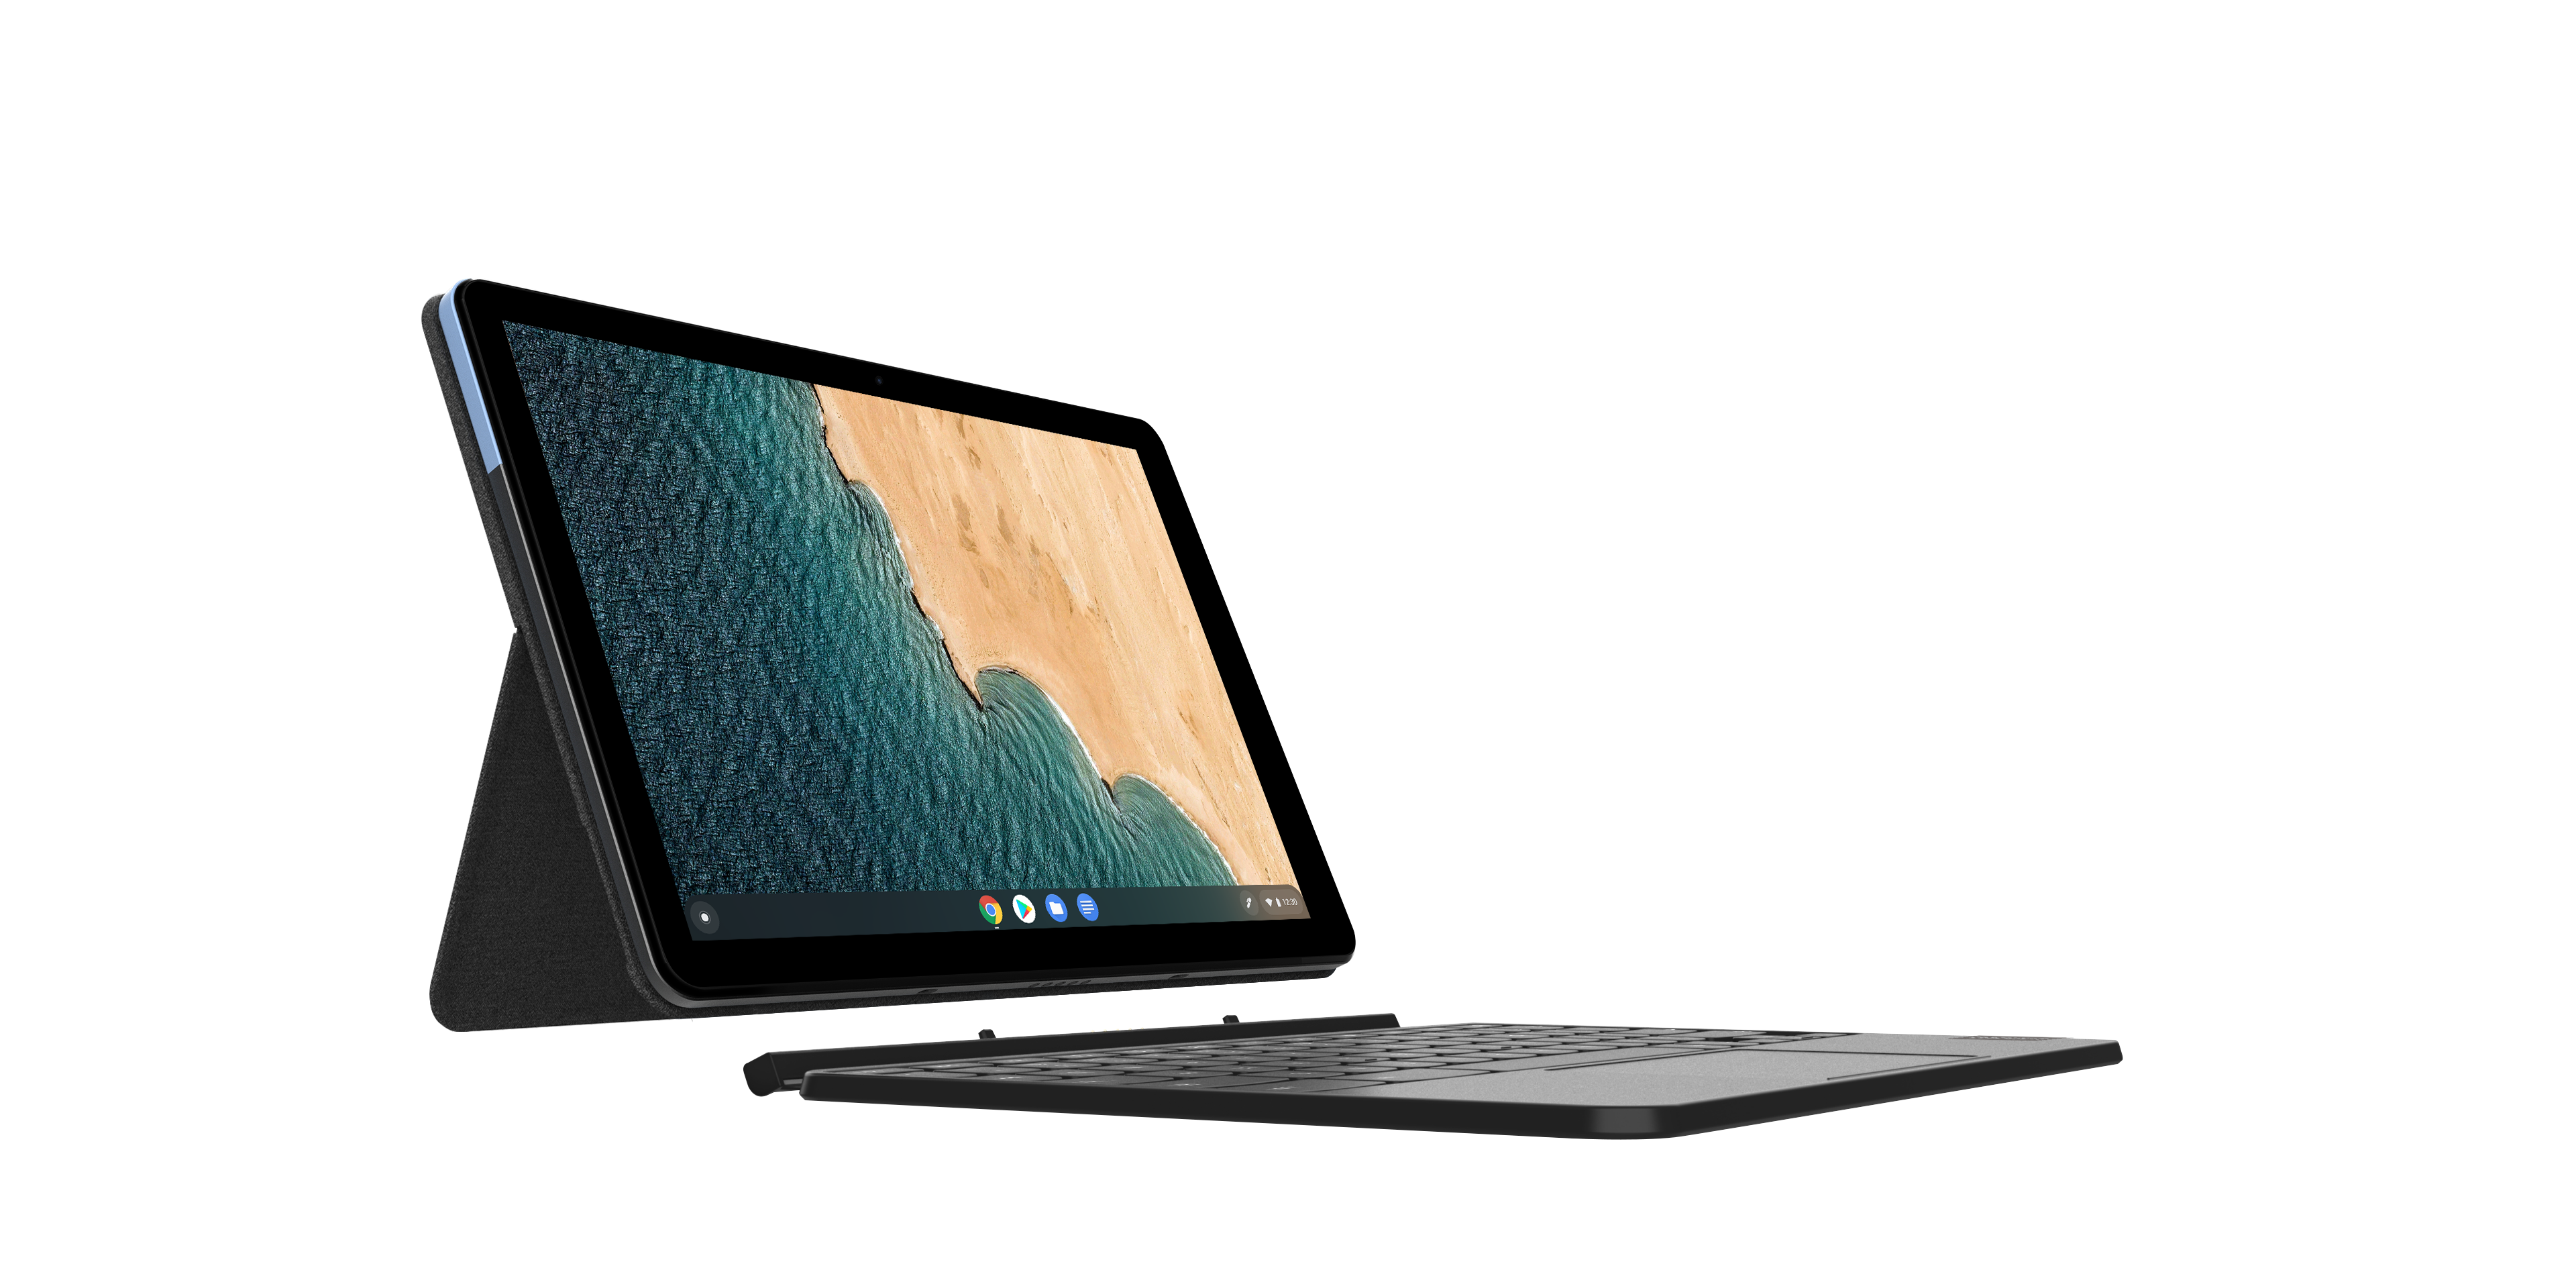 Lenovo debuts two new Chromebooks: IdeaPad Duet tablet and IdeaPad 